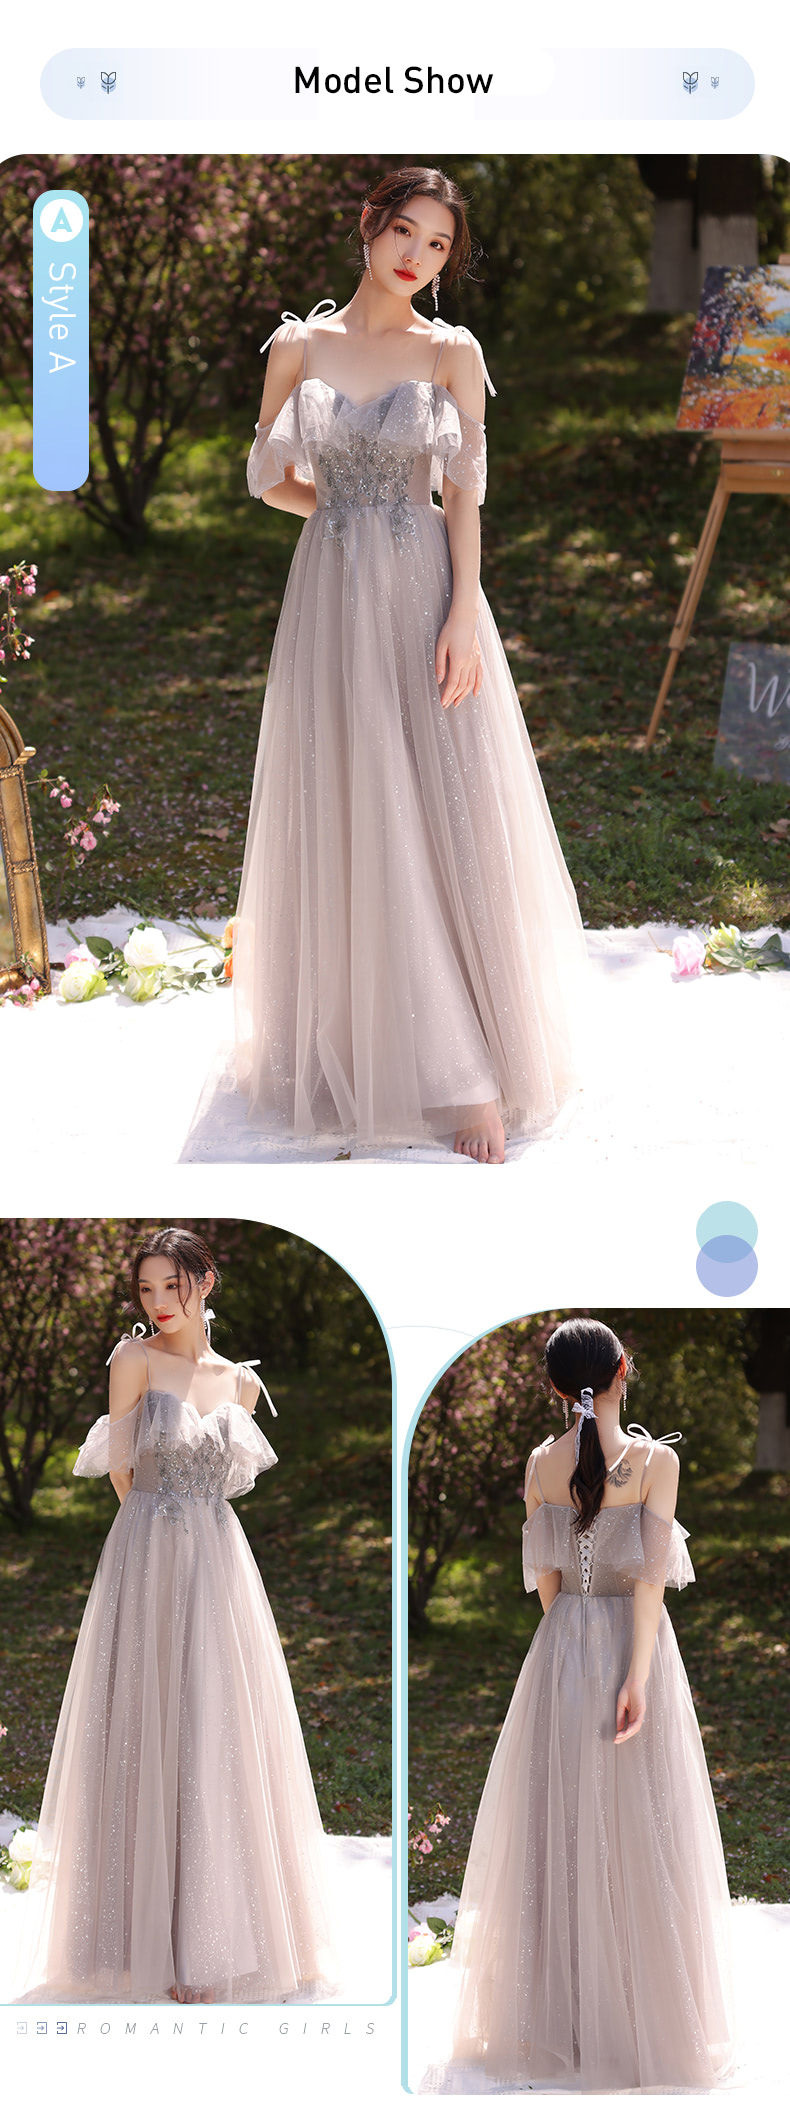 A-Line-Gray-Bridesmaid-Long-Dress-Lace-Floral-Embroidery-Party-Gown15.jpg